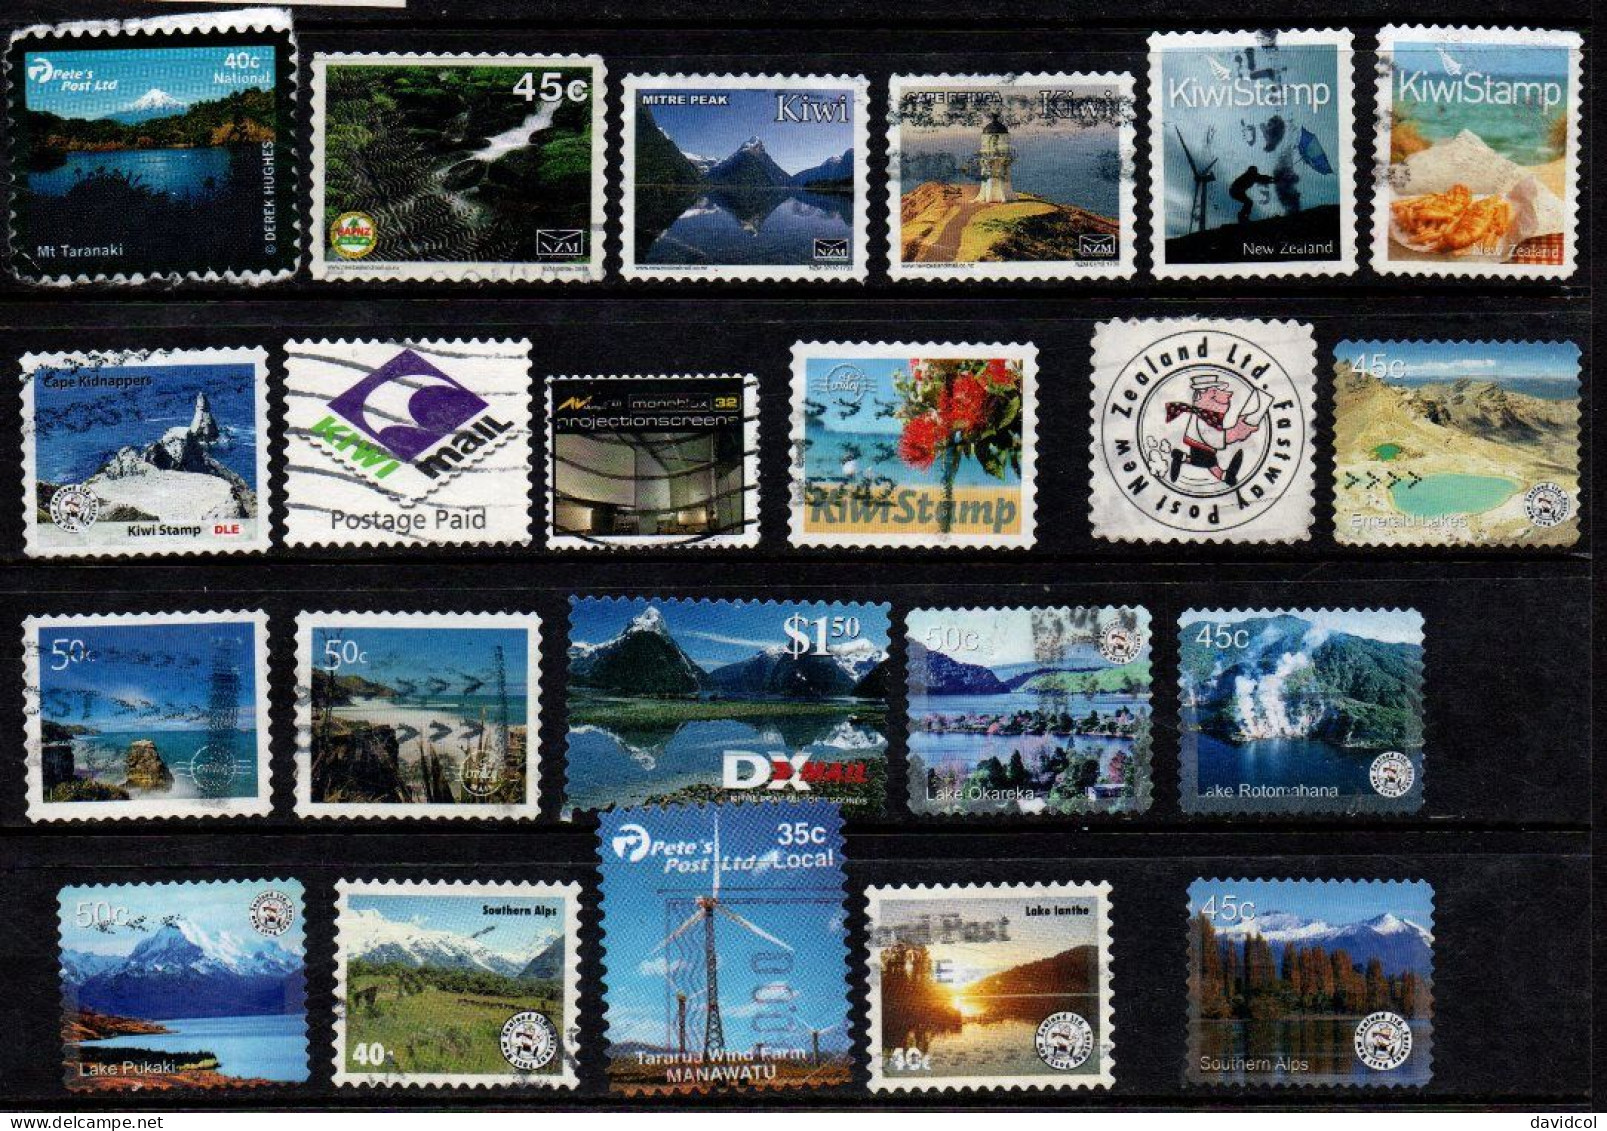 2690D - NEW ZEALAND - 2000'S - USED LOT KIWI, FASTWAY, DXMAIL, PETE'S POST.... - Usados